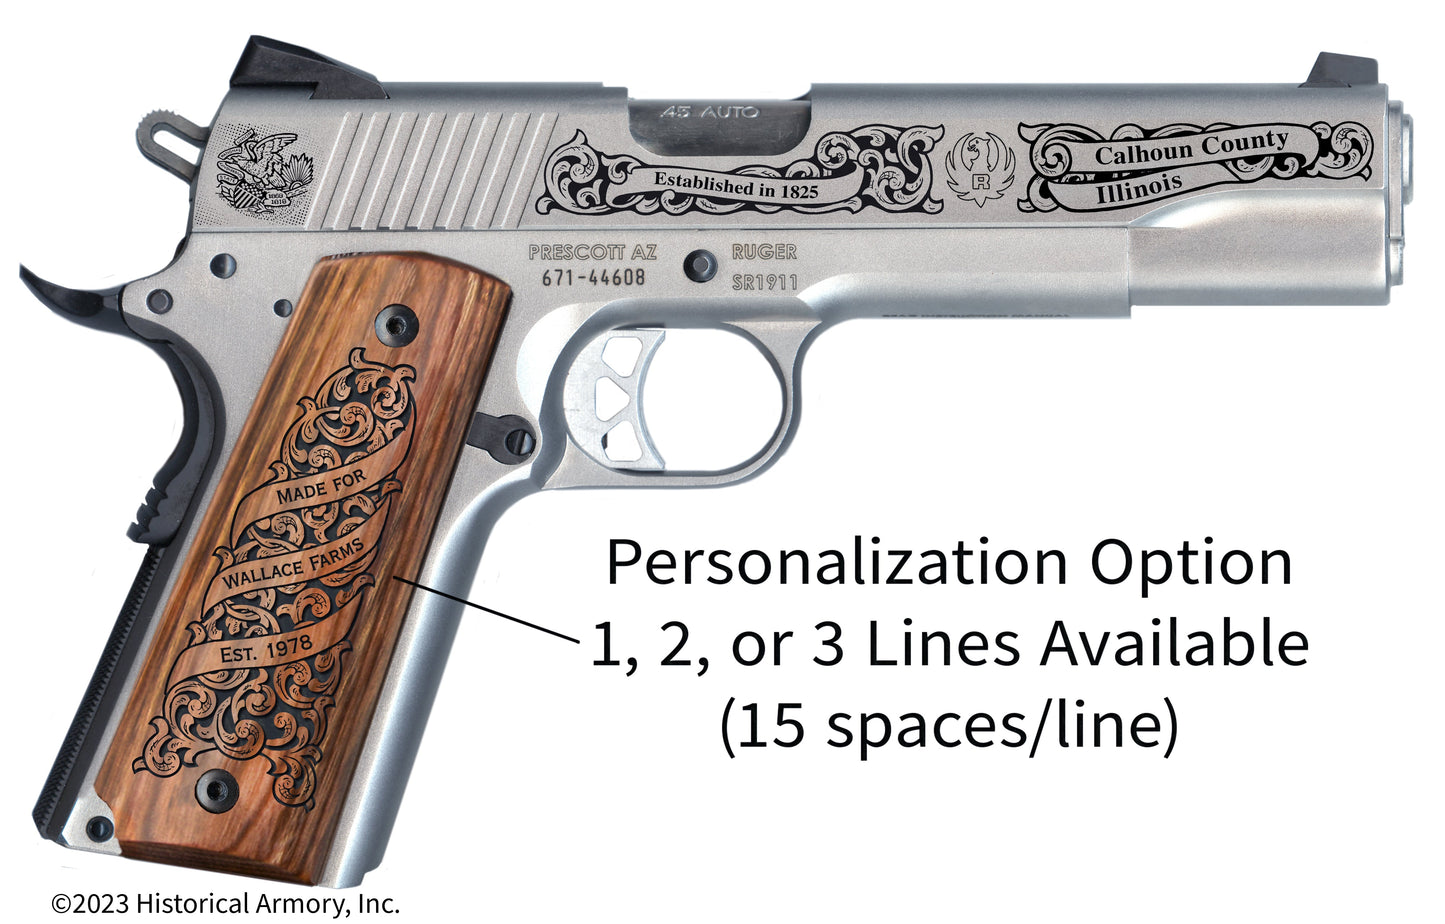 Calhoun County Illinois Personalized Engraved .45 Auto Ruger 1911